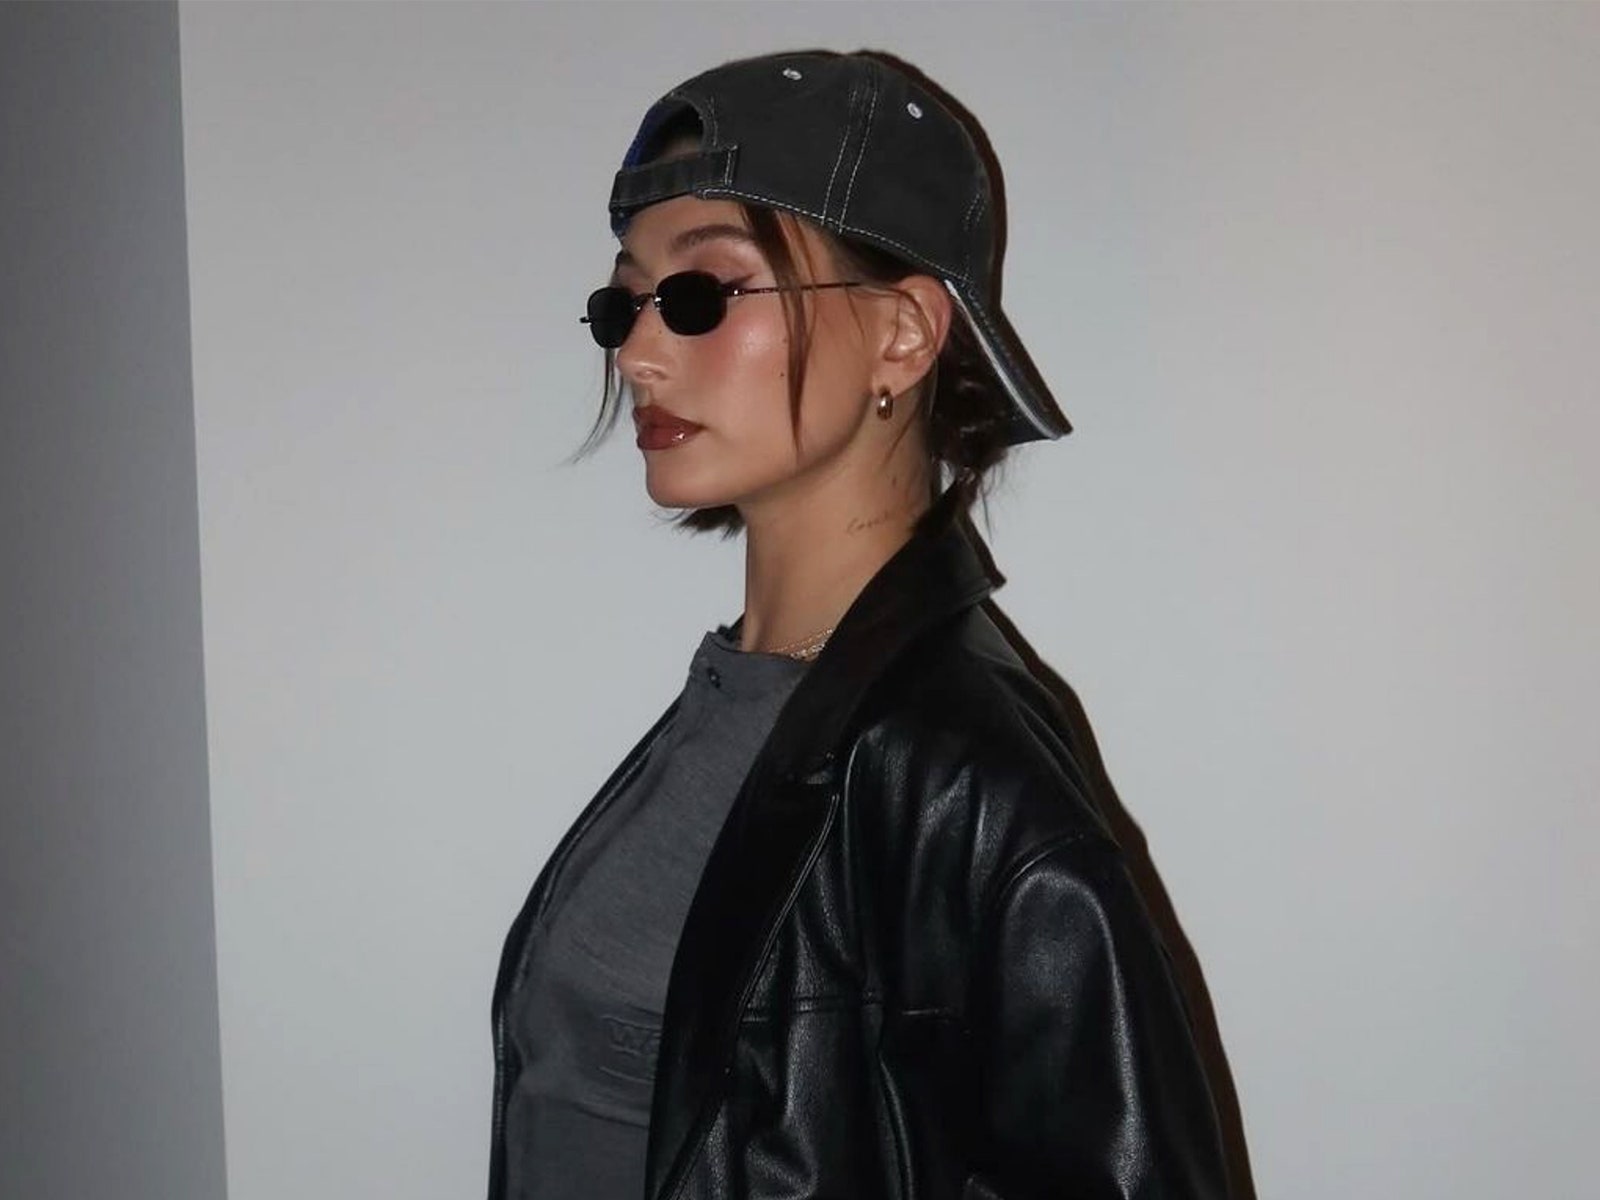 It's official: Hailey Bieber has signed off on the ‘dad bob’